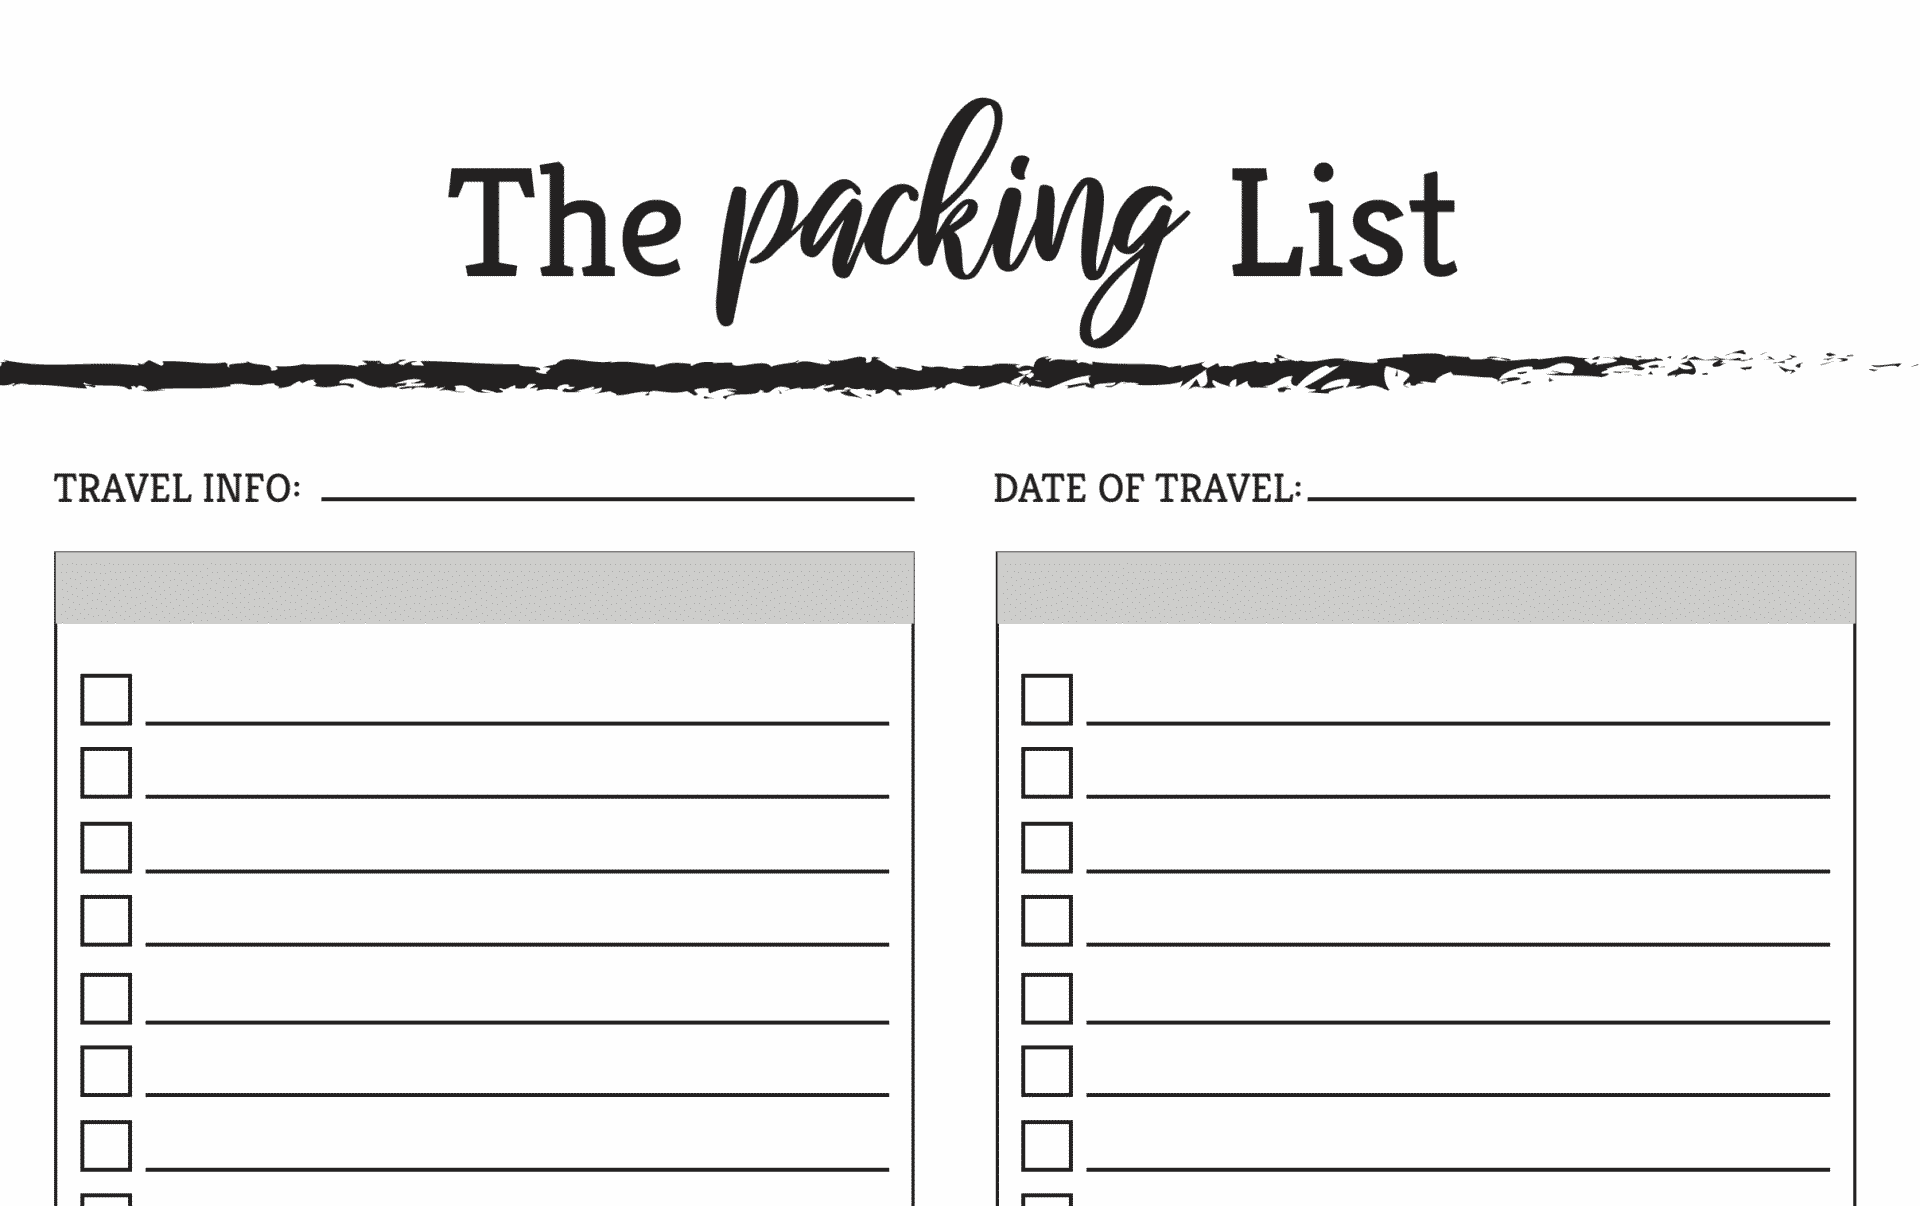 Fill In The Blank Printable Travel Packing List - Checkboxes And